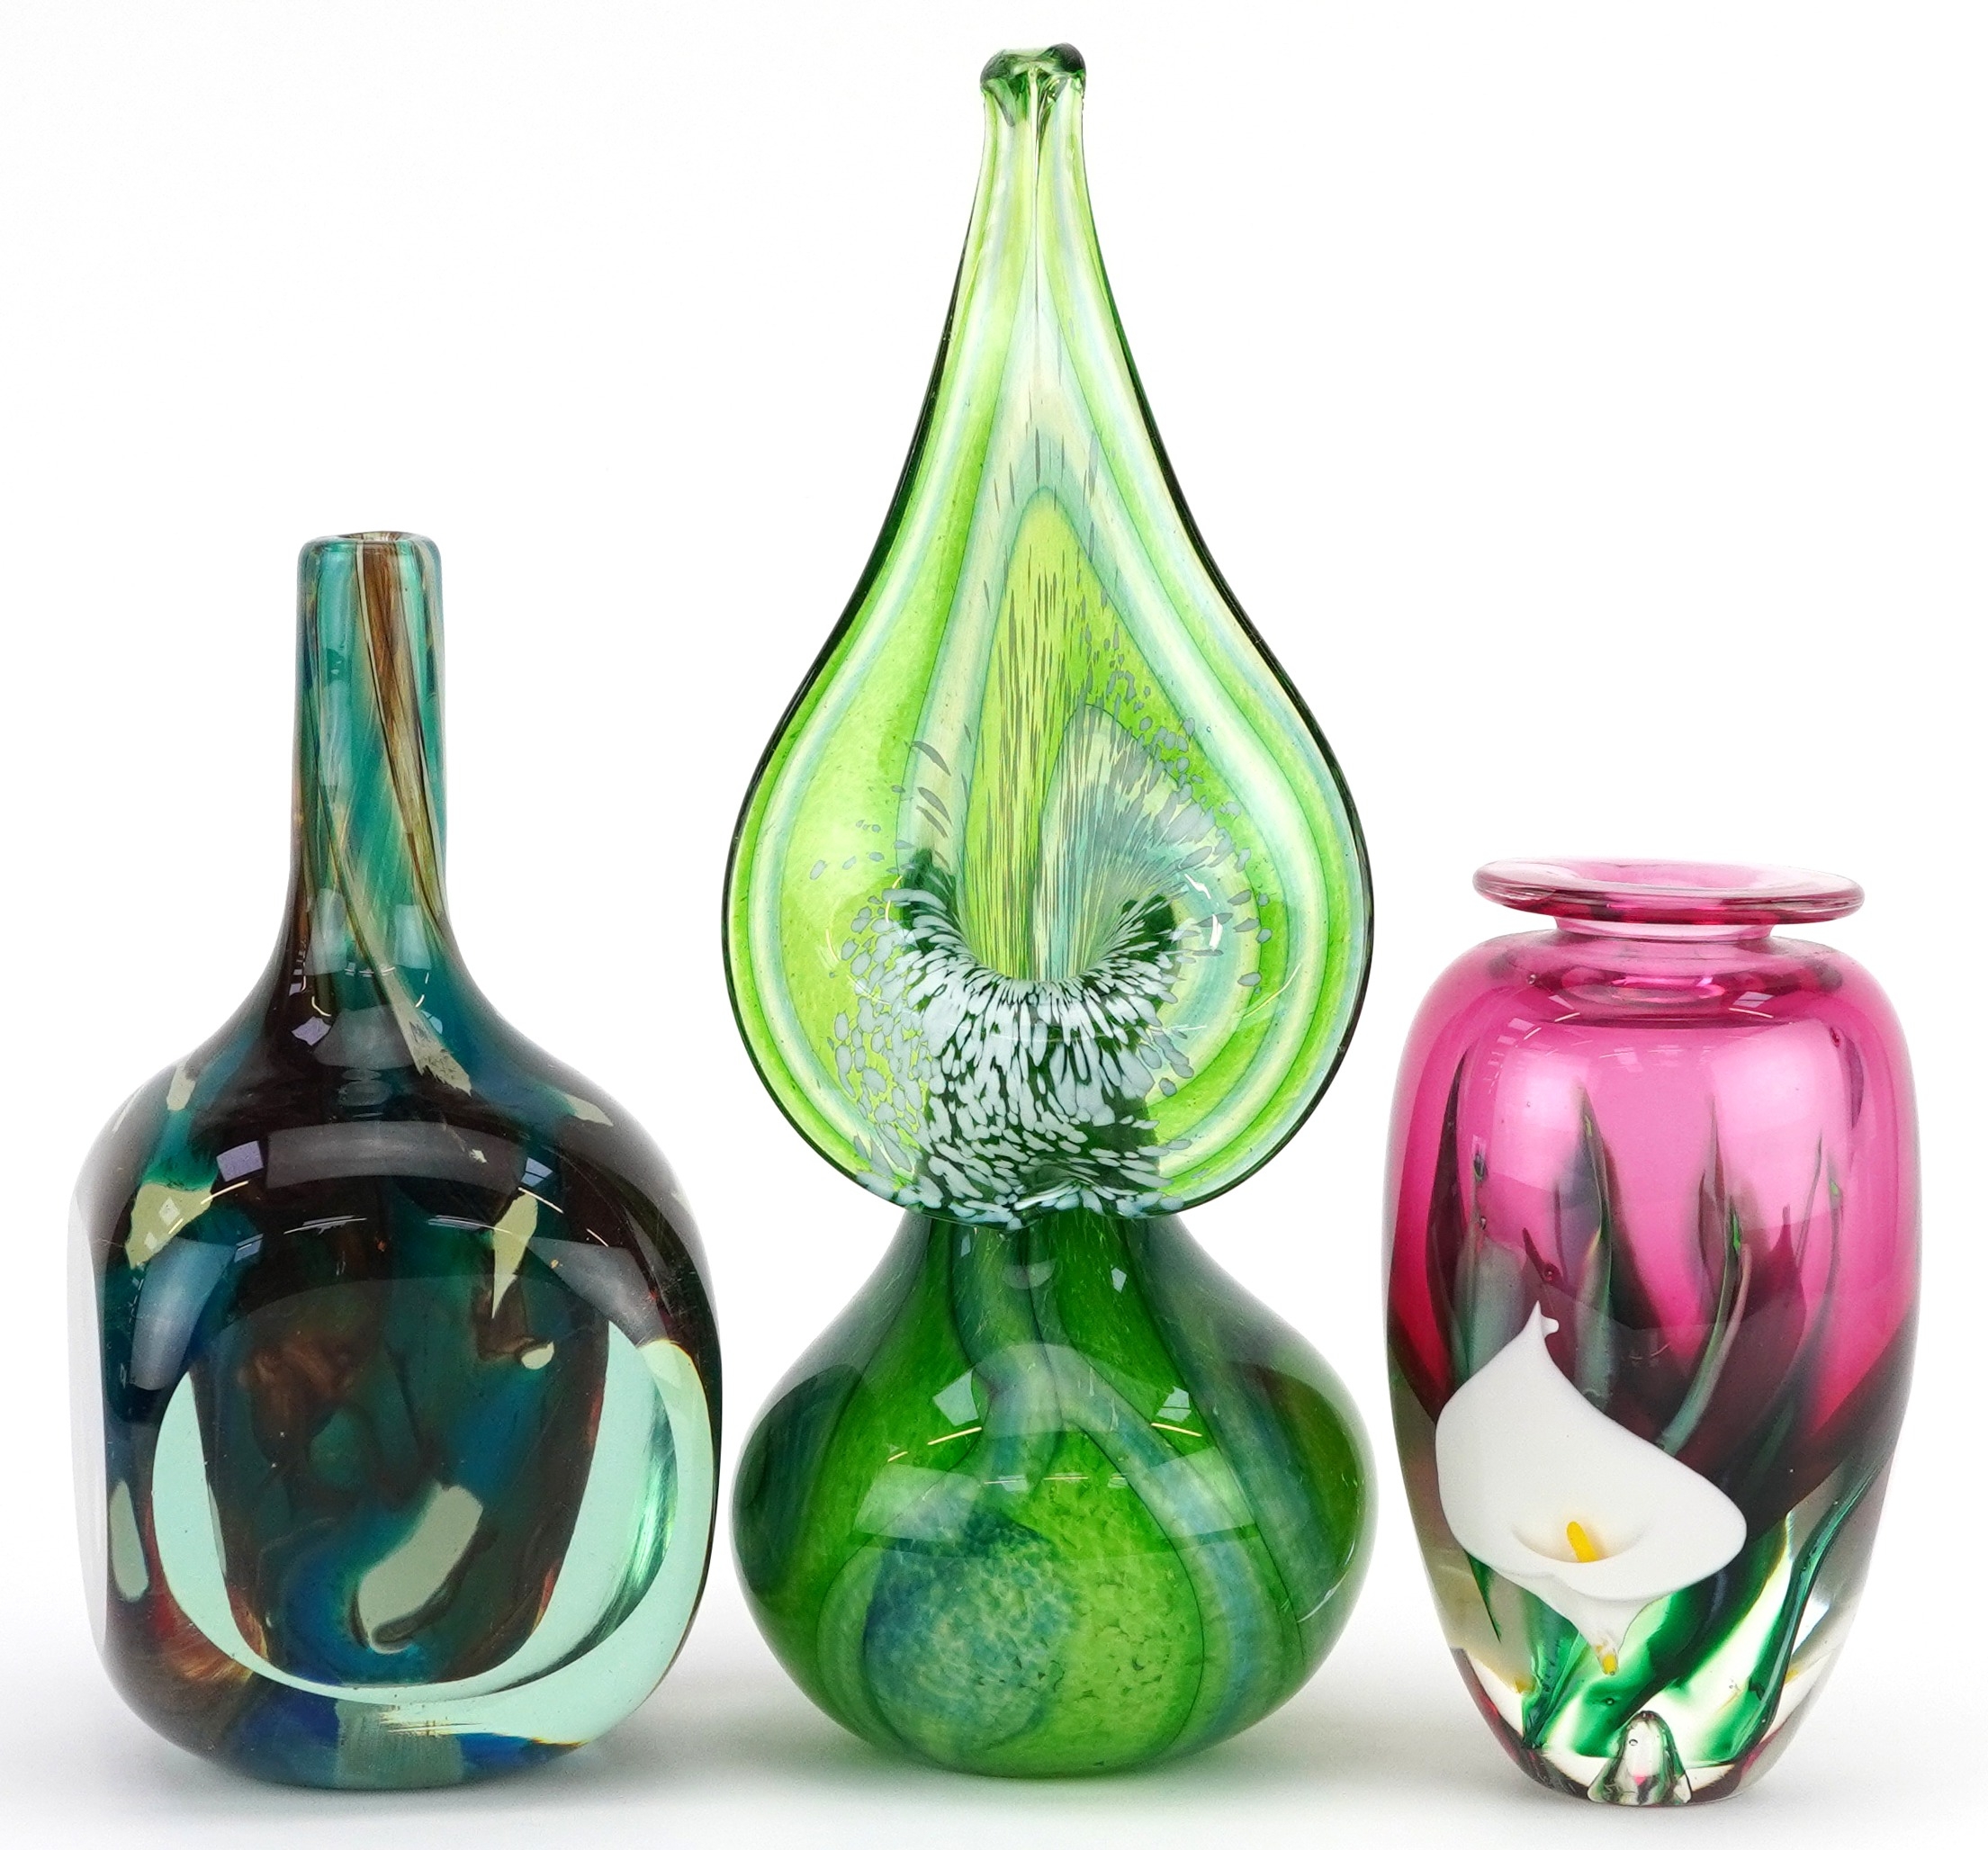 Art glassware comprising a New Zealand Calla lily example by Peter Raos, Mdina and a Jack in the